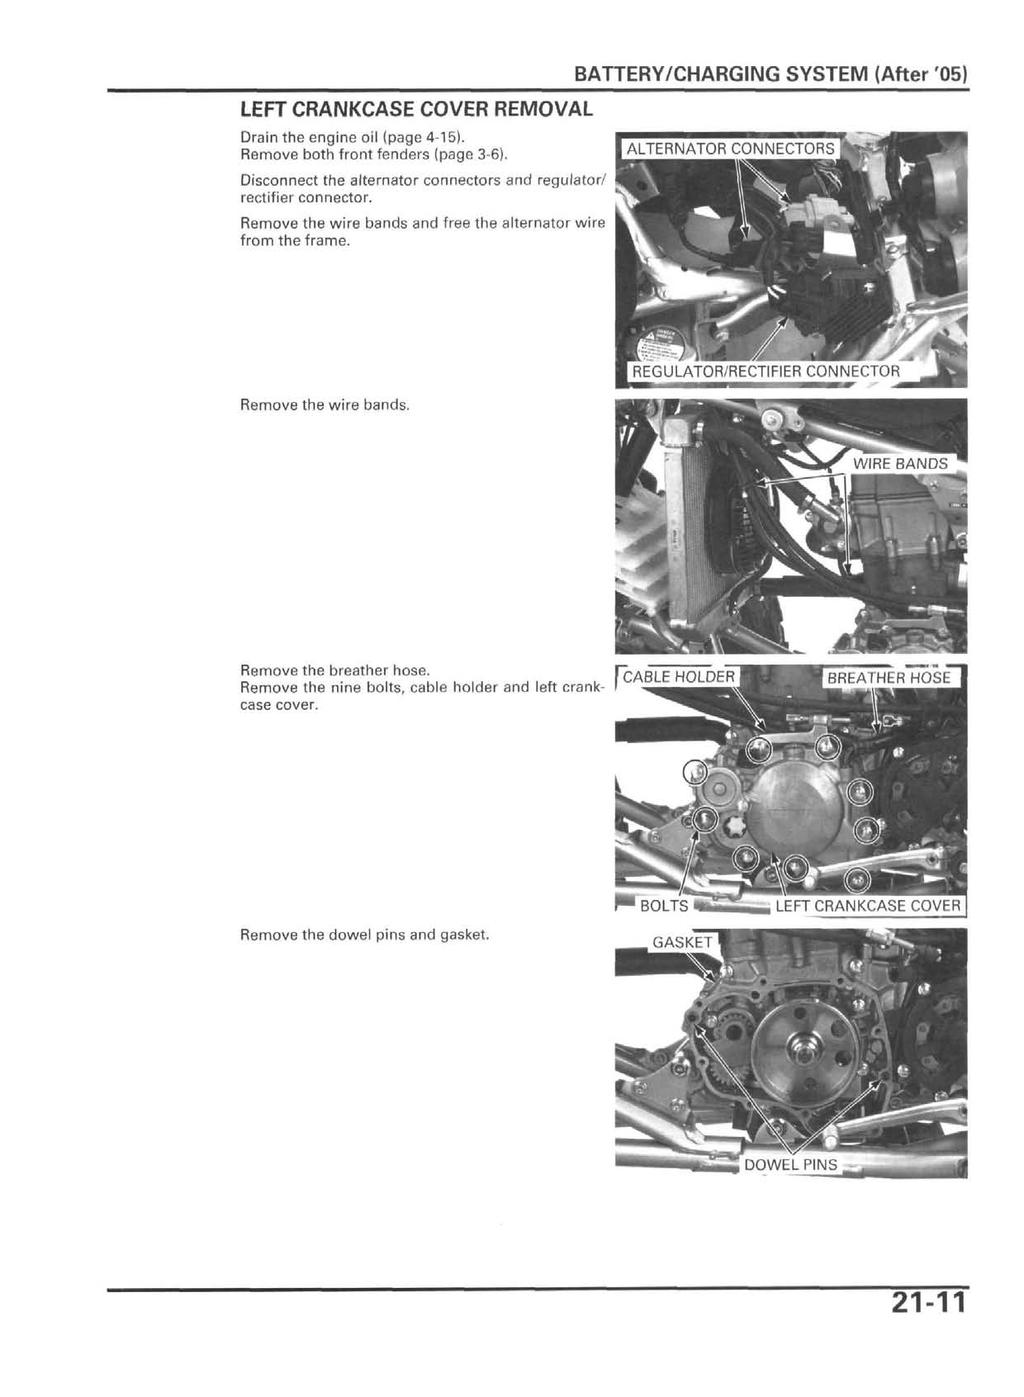 LEFT CRANKCASE COVER REMOVAL Drain the engine oil (page 4-15). Remove both front fenders (page 3-6). Disconnect the alternator connectors and regulator/ rectifier connector.